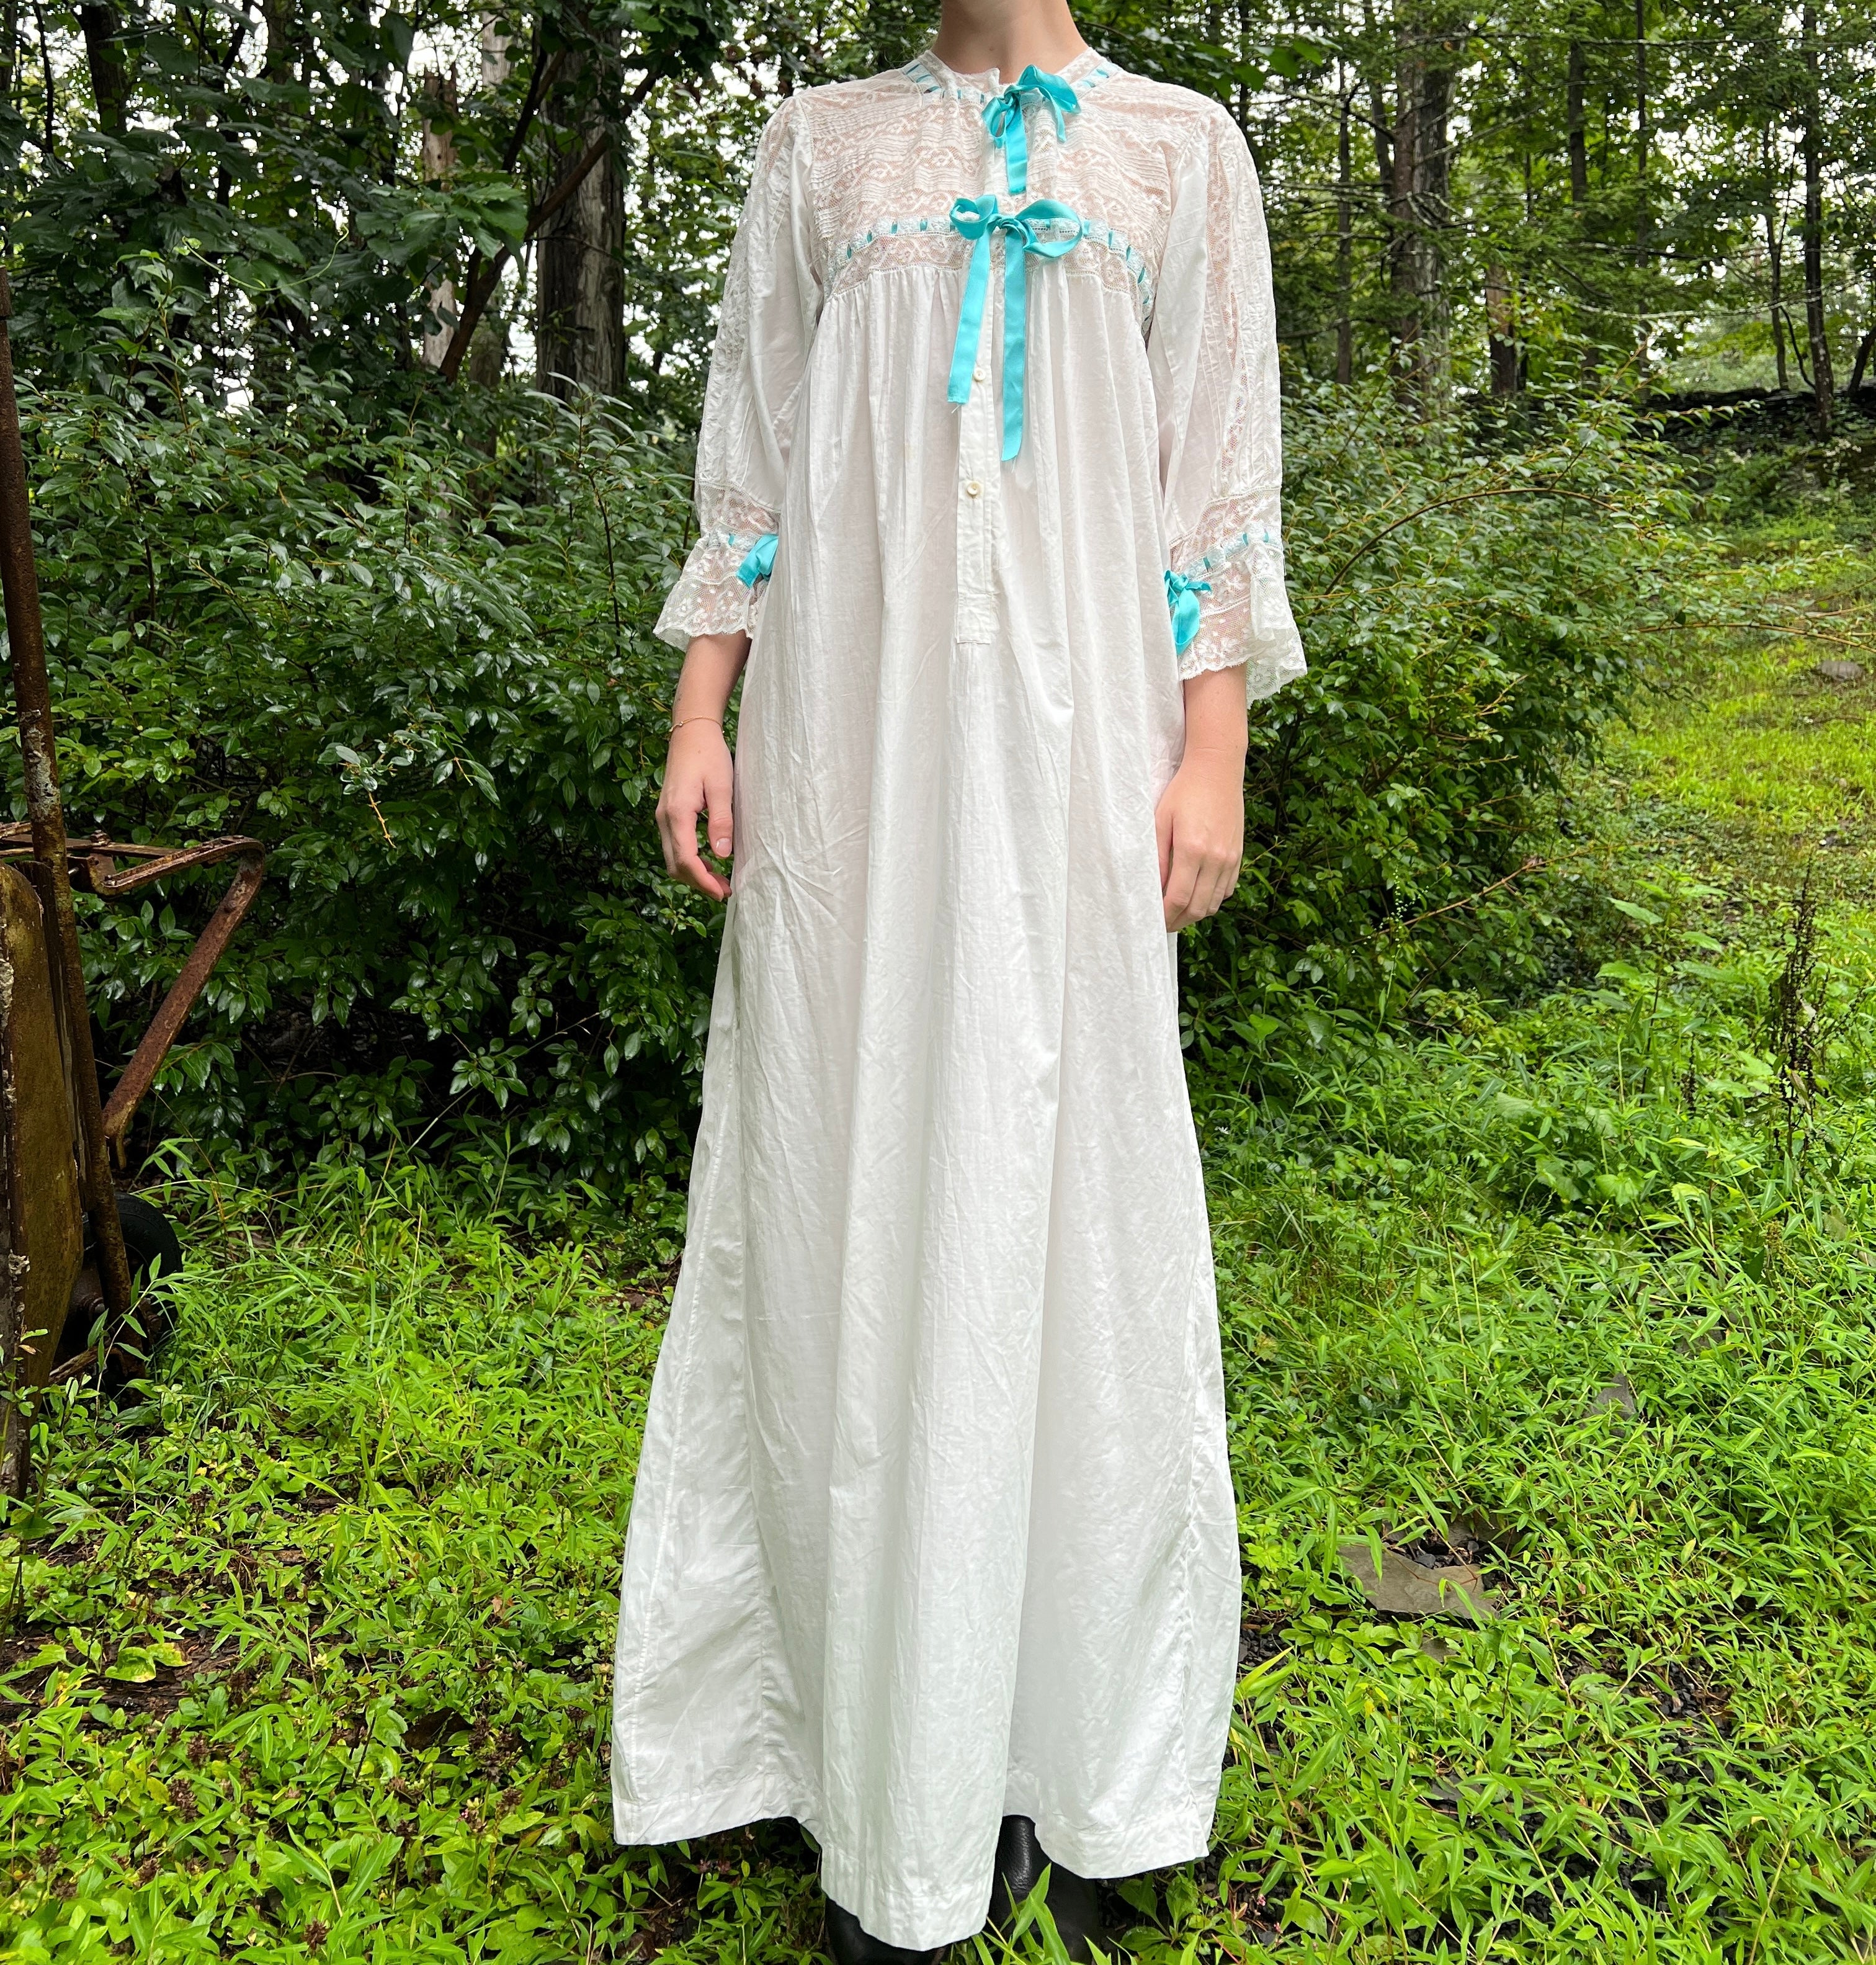 Edwardian White Cotton Dress with Blue Ribbon and Lace